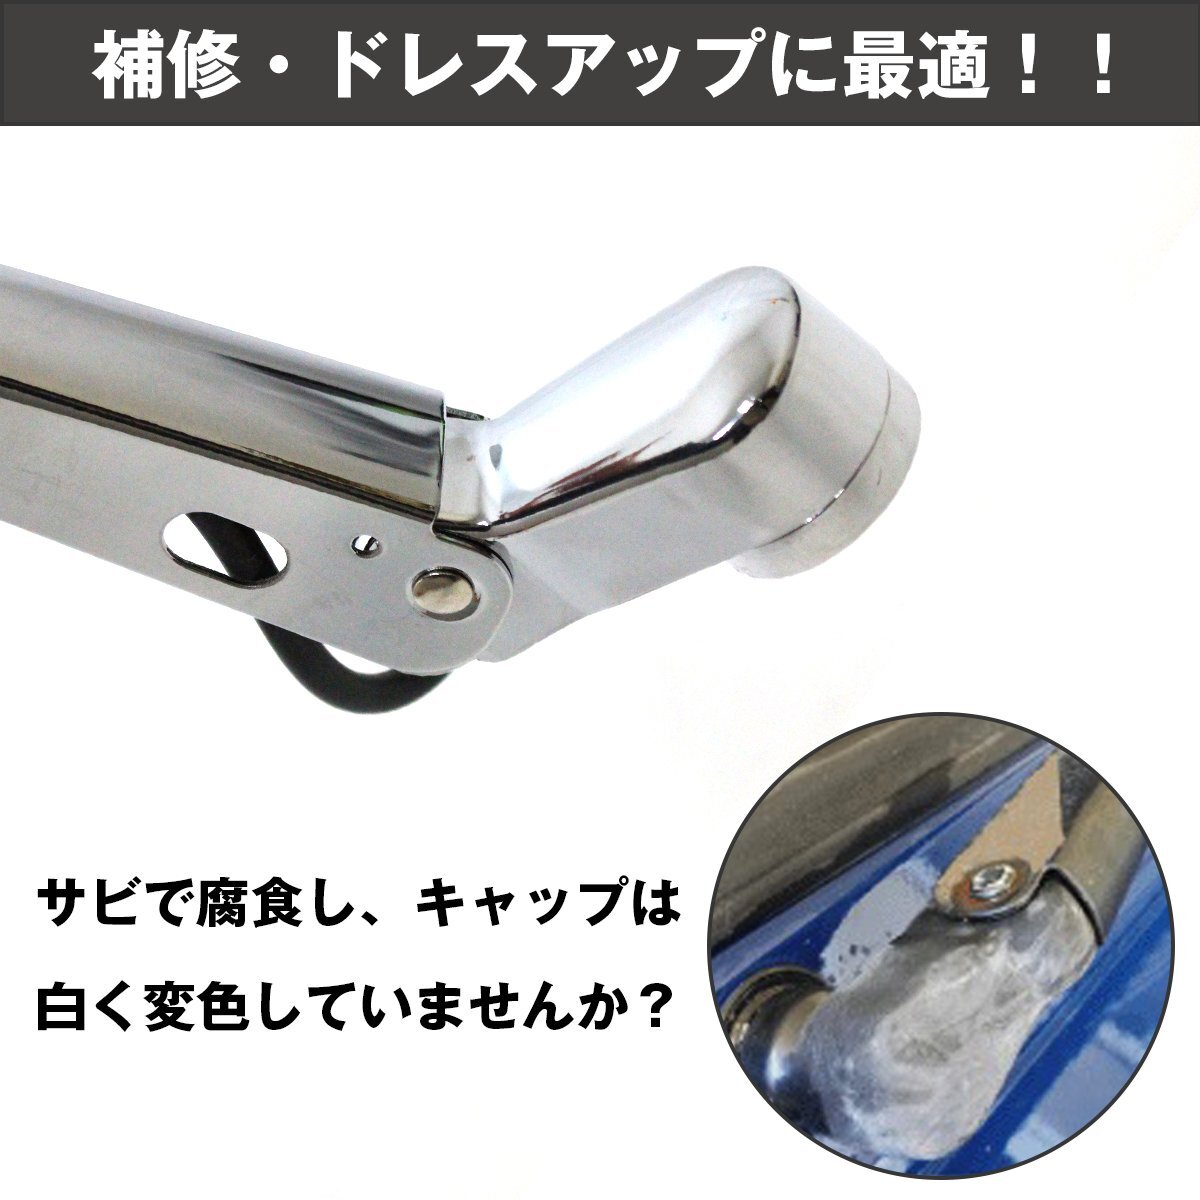 [ new goods immediate payment ] Mitsubishi Fuso generation Canter standard body vehicle for plating wiper arm wiper blade exchange standard solid type 